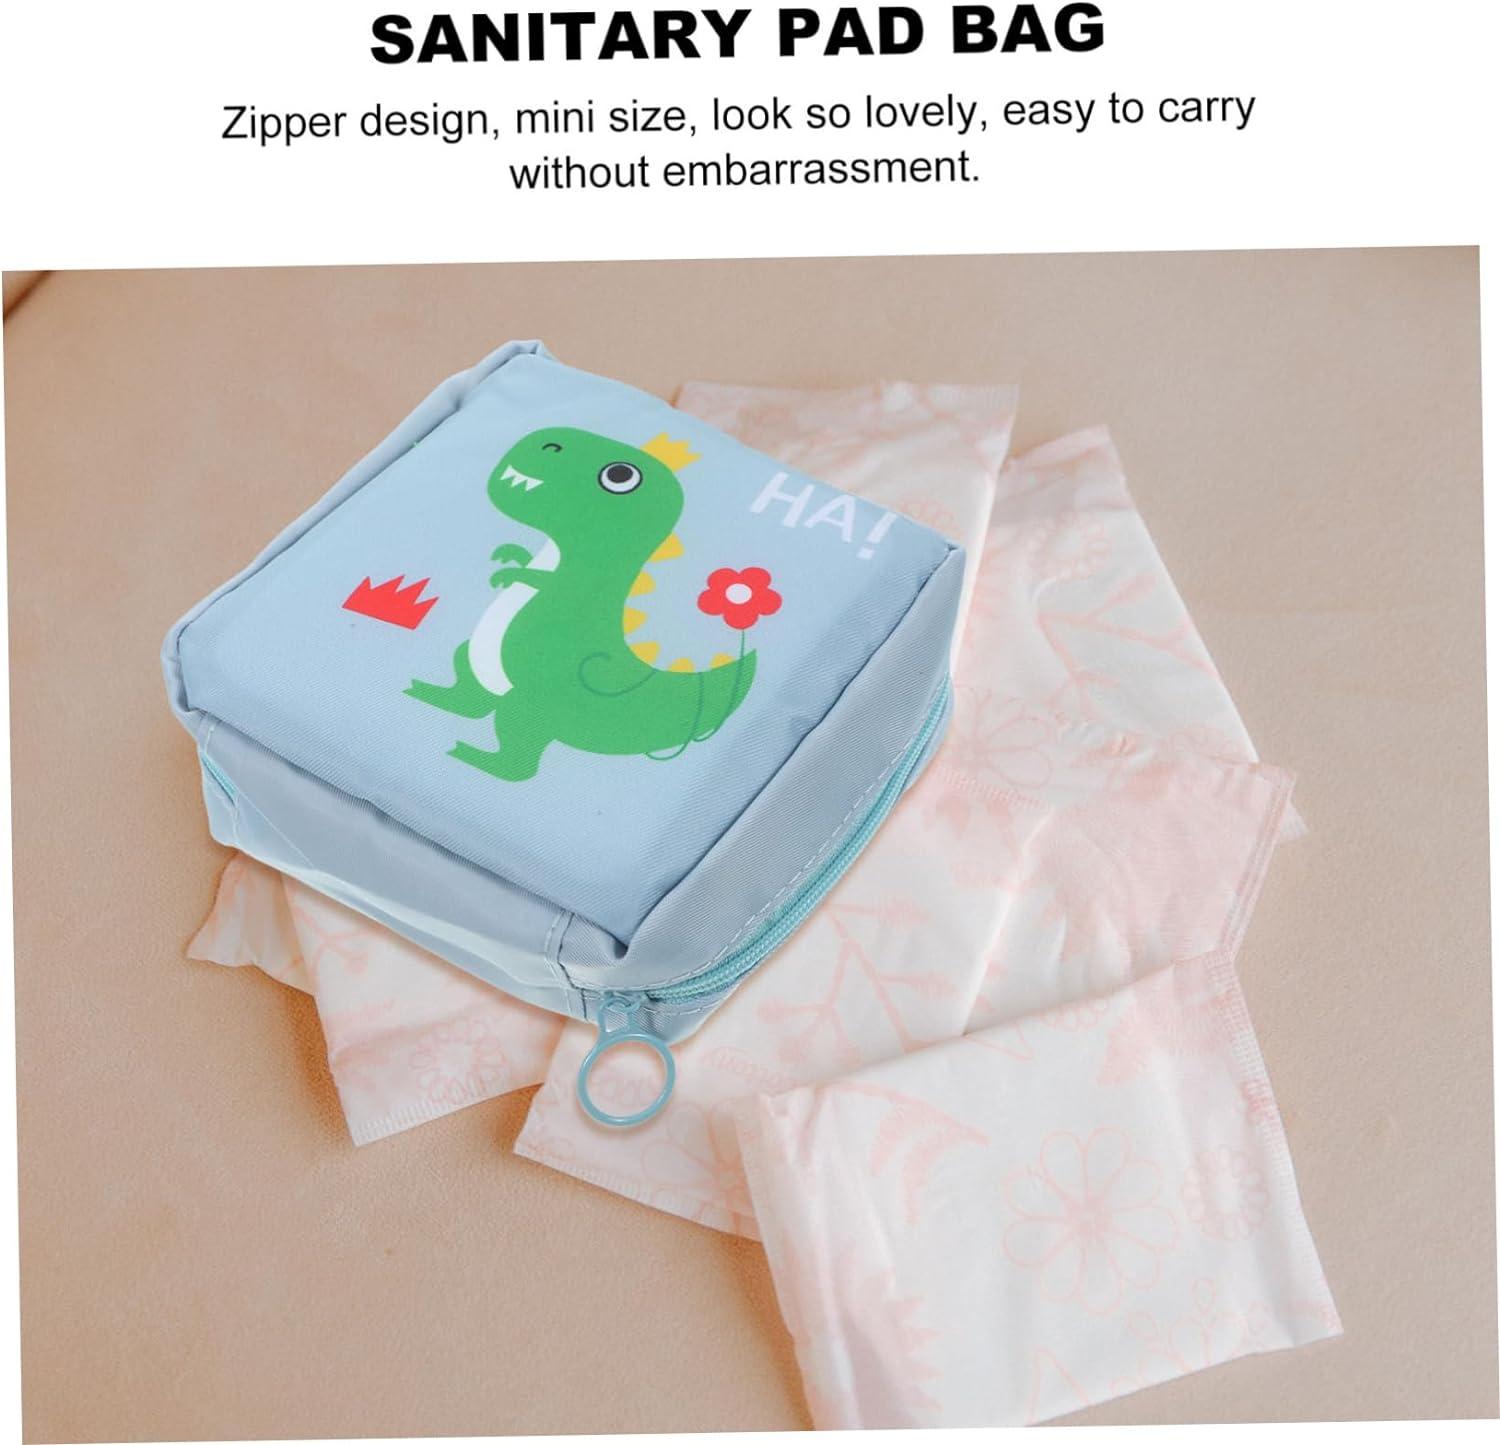 Buy Menstrual Pad Bag 4 Pcs Zipper Sanitary Napkin Bag Tampons Collect Bags  for Women Girls (Cactus, Flamingo, Flower, Stripe, 1 Pcs Each) Online at  Low Prices in India - Amazon.in